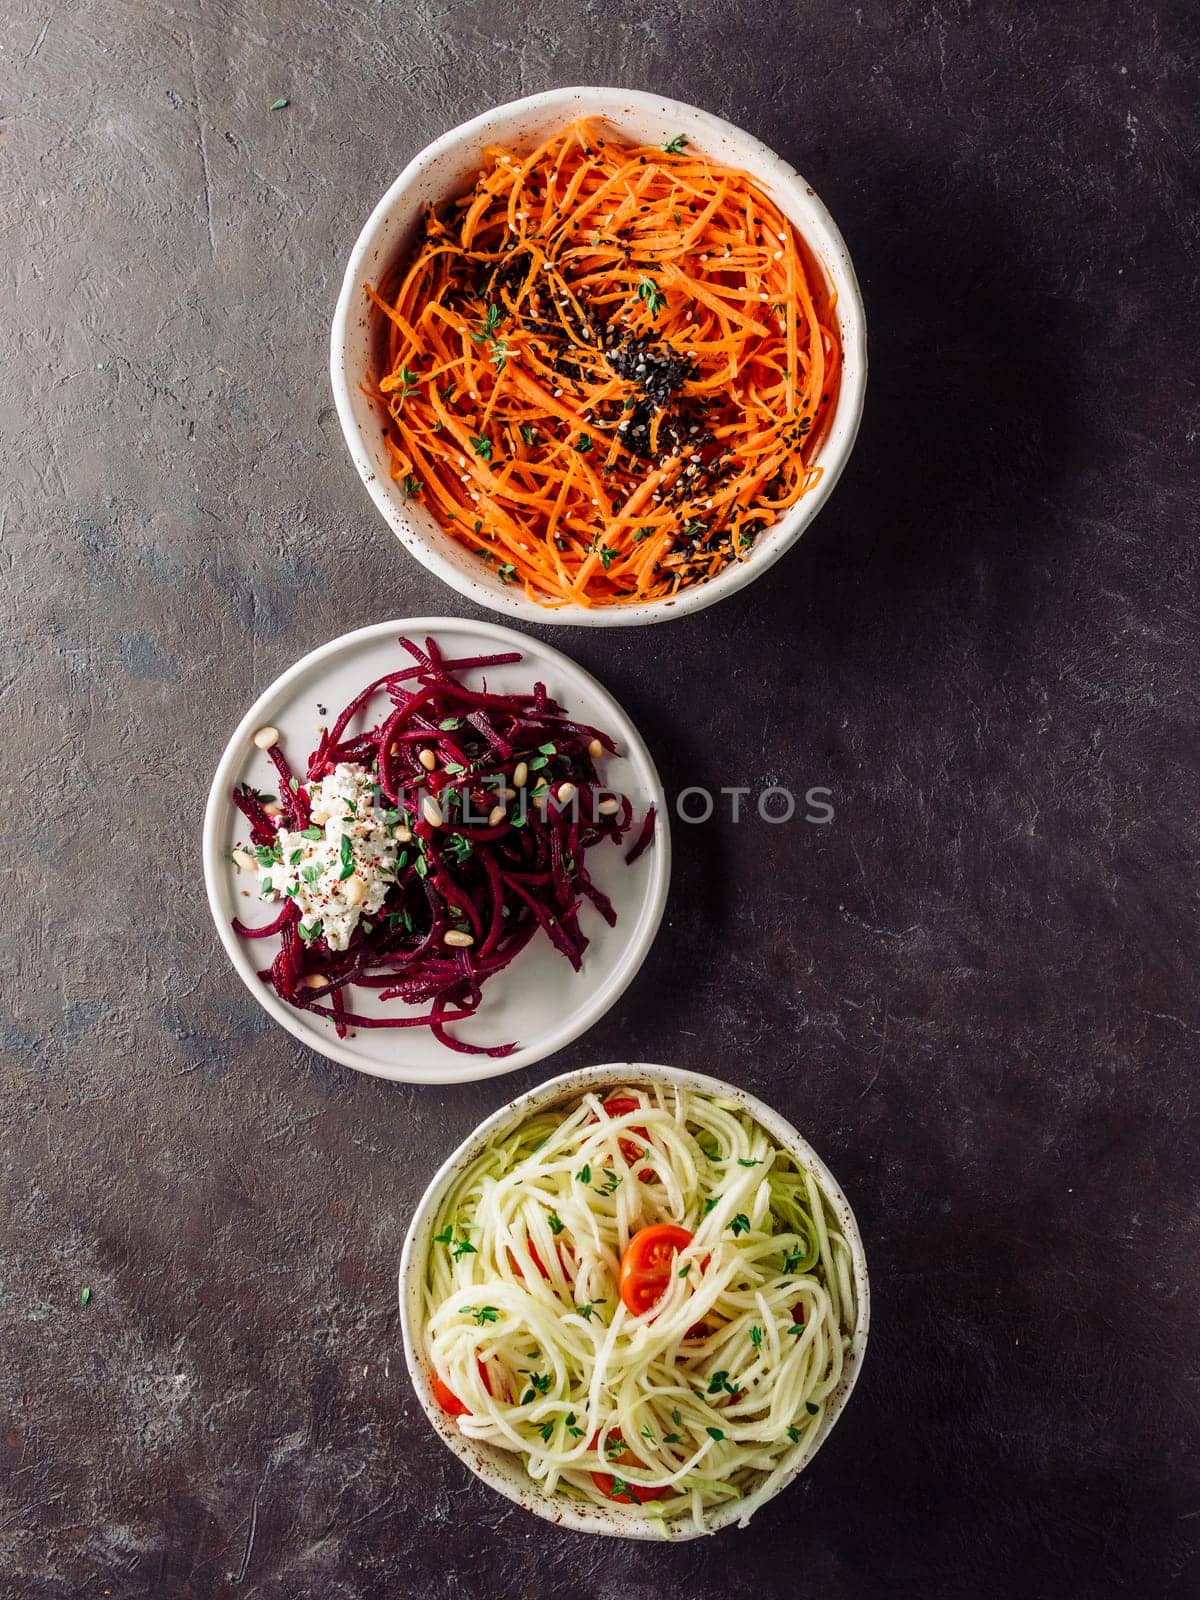 Ideas and recipes for healthy salad - spicy sesame carrot noodles salad,raw beetroot noodles wih ricotta,zucchini zoodles salad with tomatoes.Various vegetarian salads ready-to-eat.Top view.Copy space